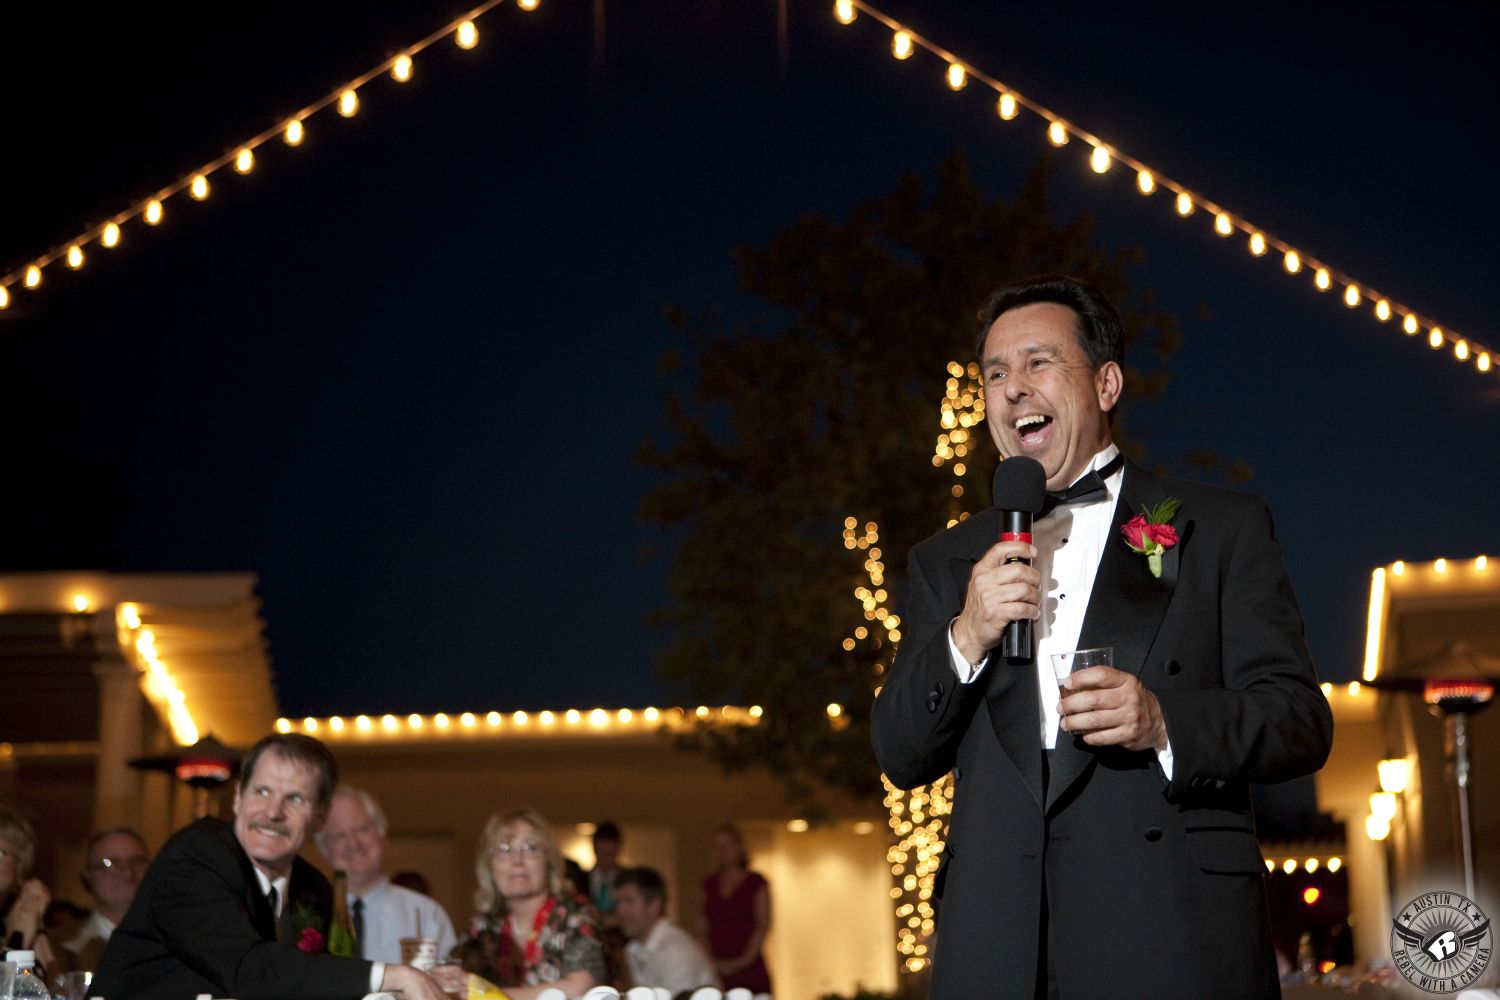 Happy father of the bride in black tuxedo and red rose boutonniere toasts couple at the wedding reception with twinkly lights strung behind him.